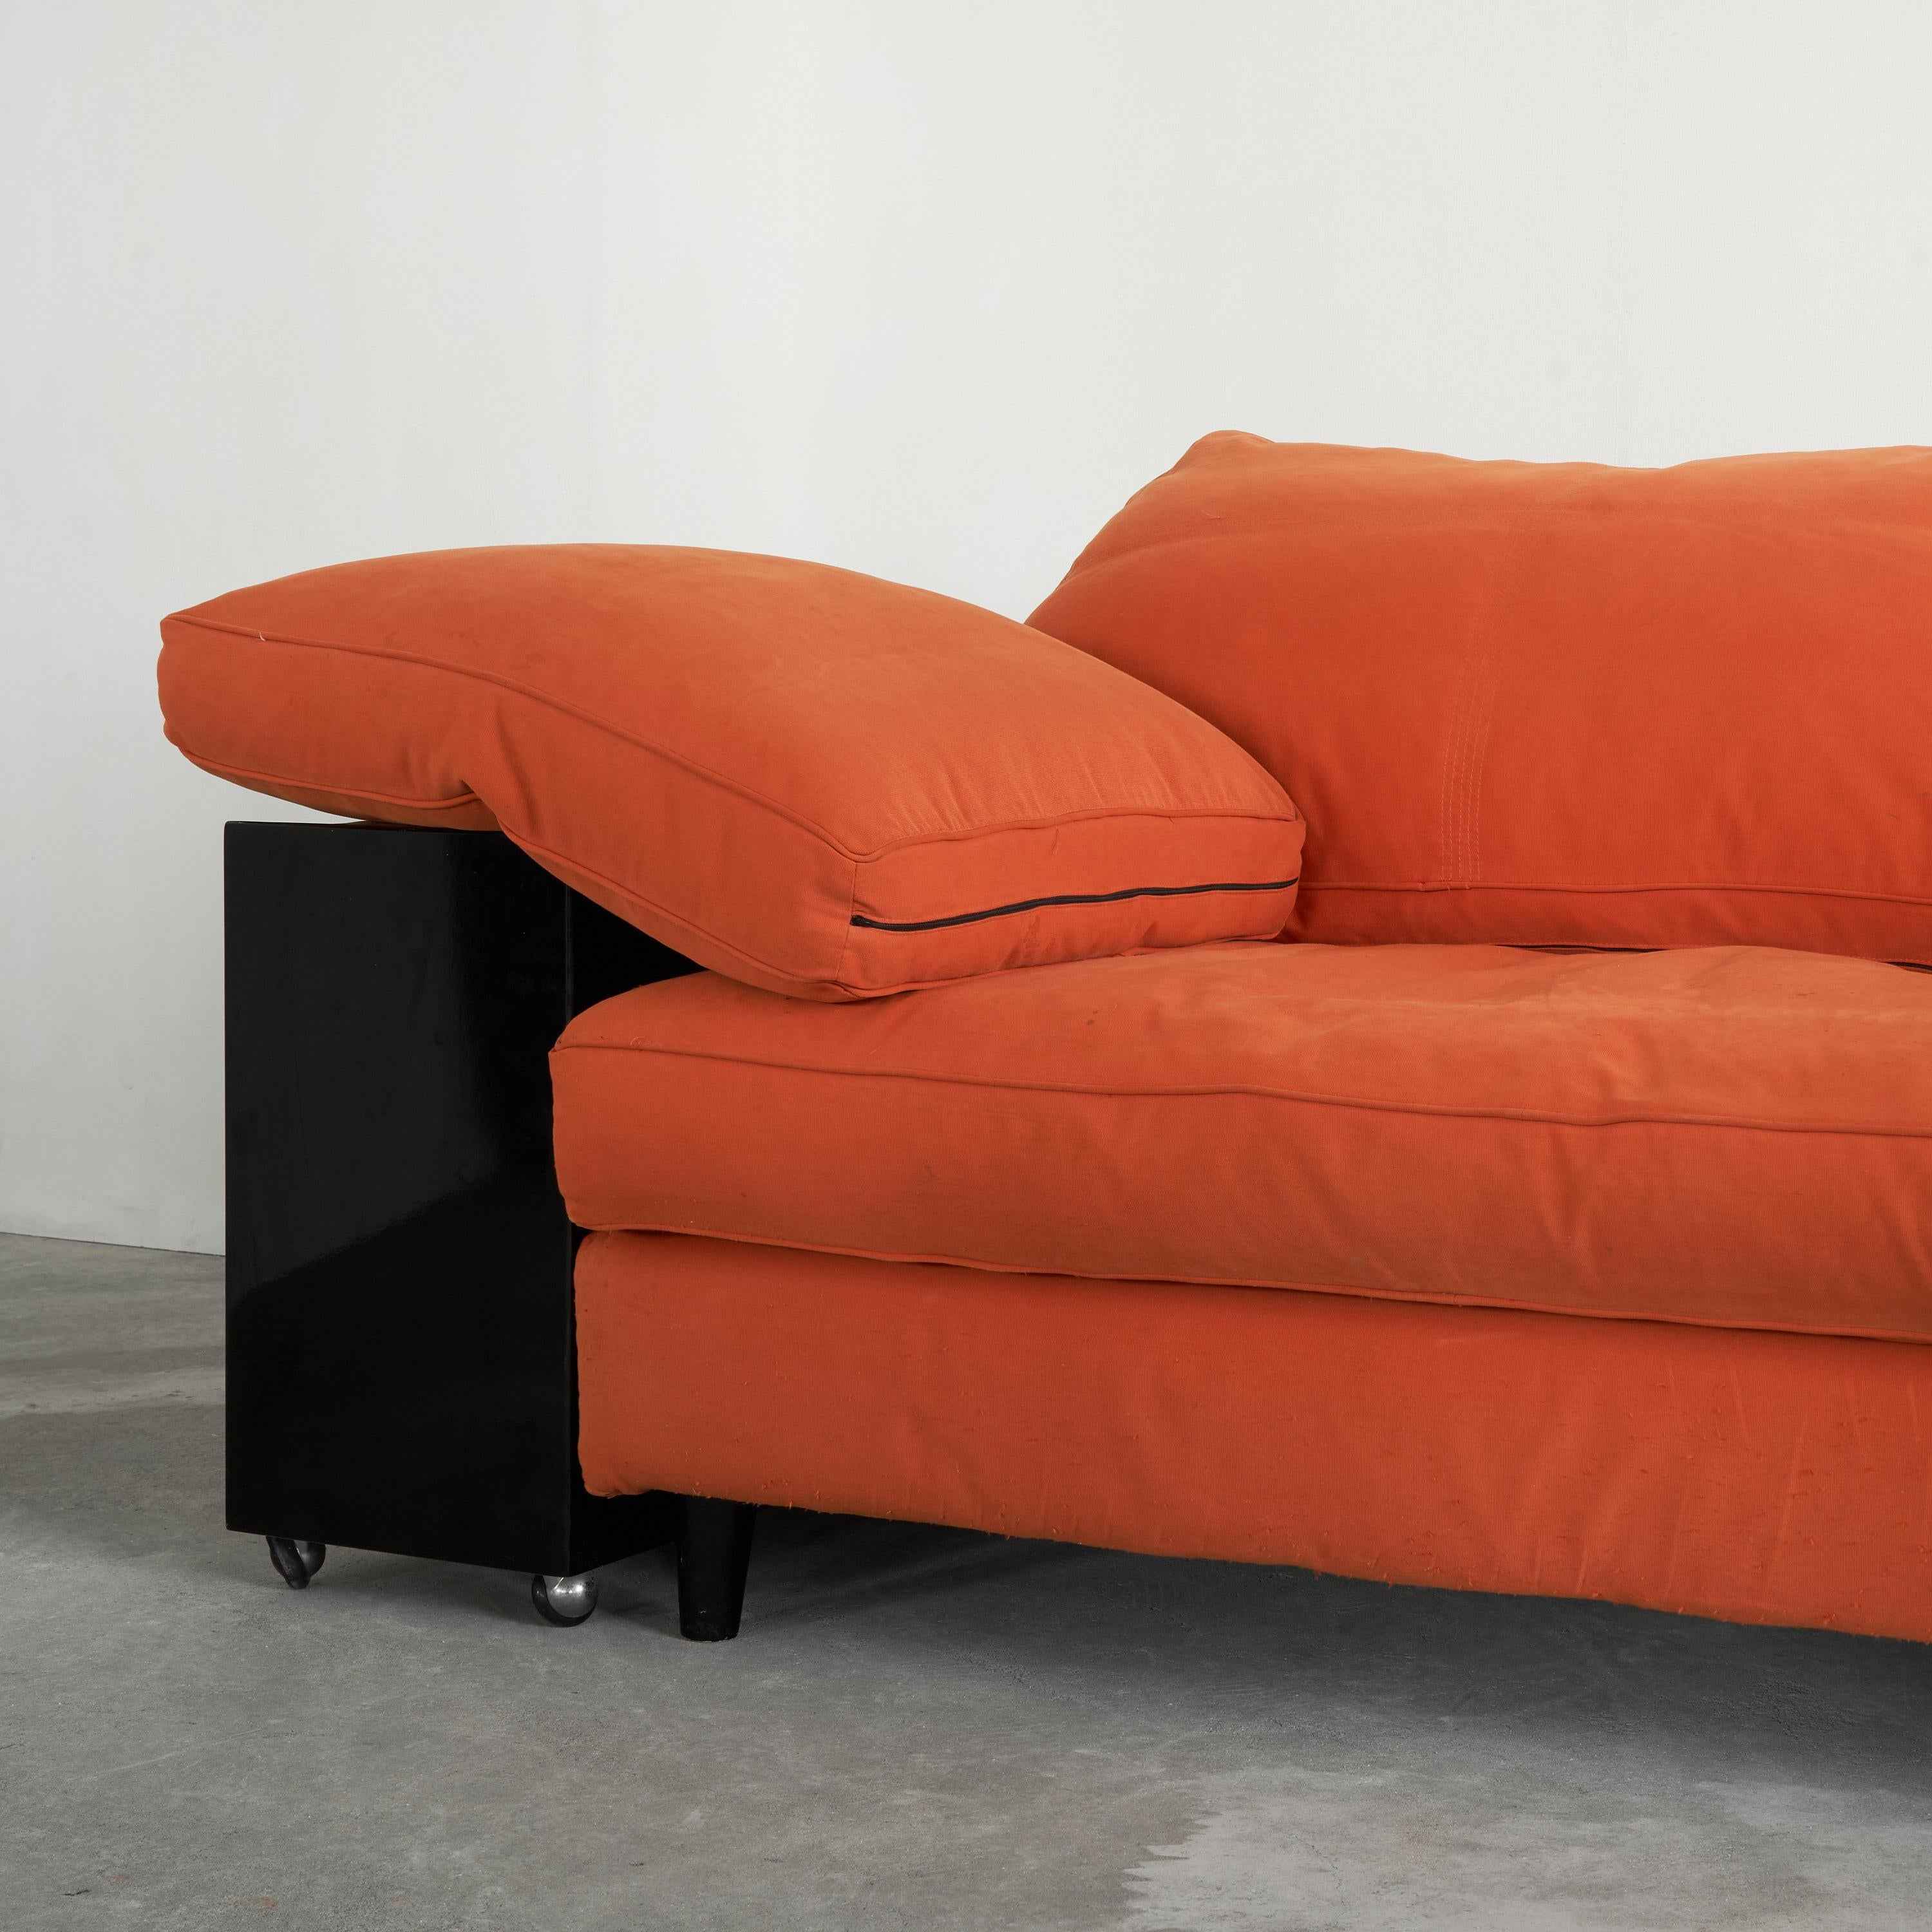 20ième siècle Eileen Gray 'Lota' Sofa in Black Lacquer and Orange Fabric 1980s en vente